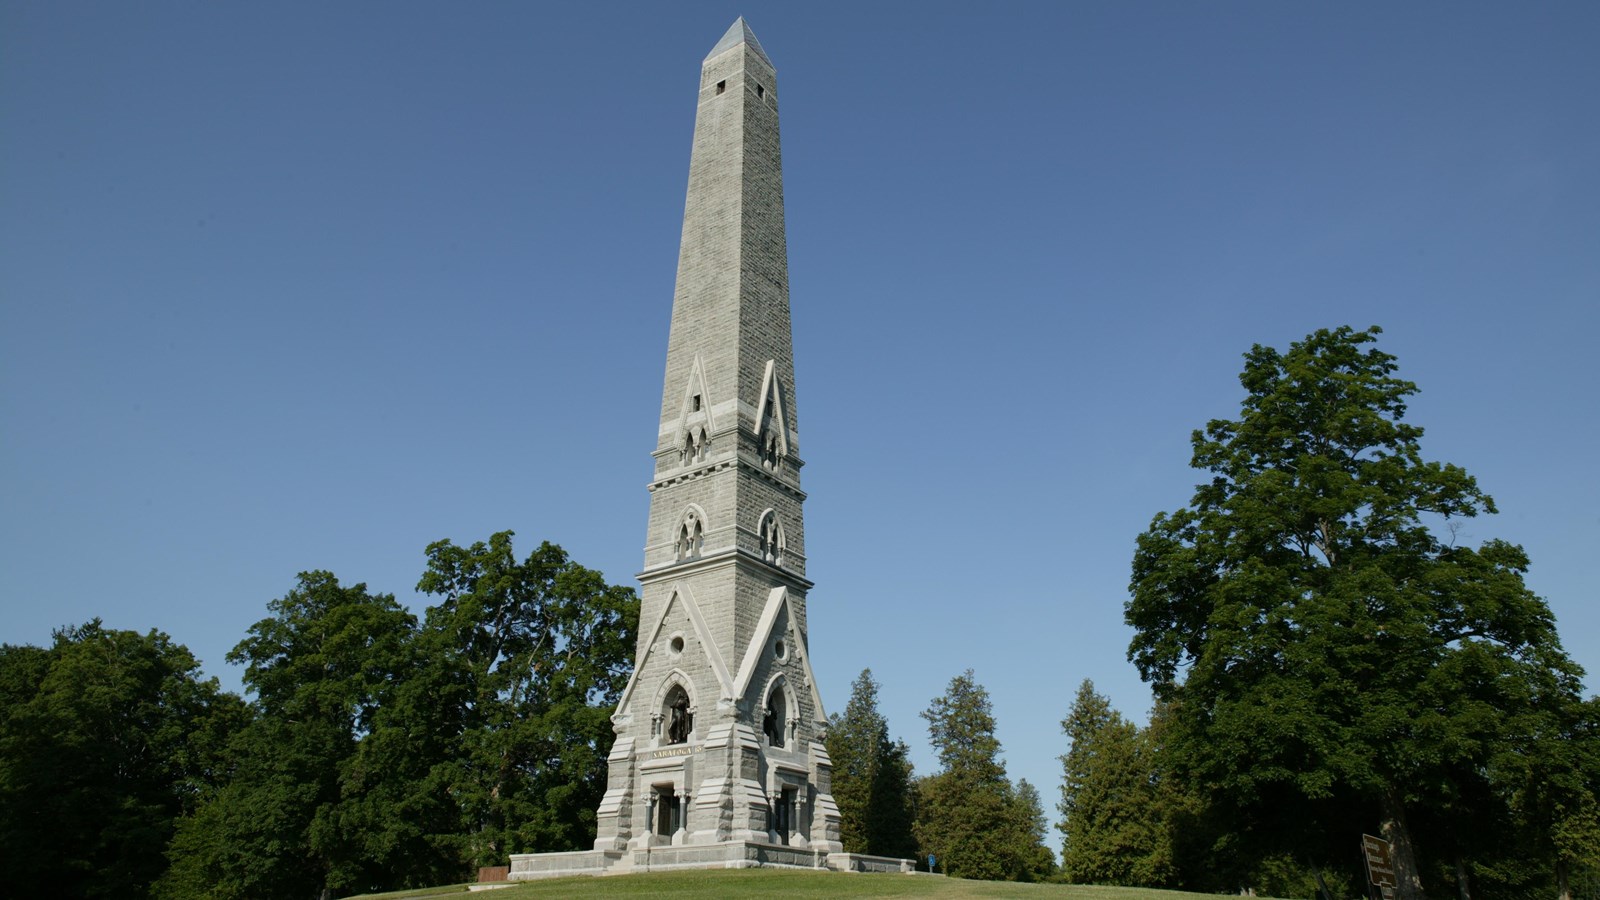 A tall, granite obelisk monument surrounded by trees